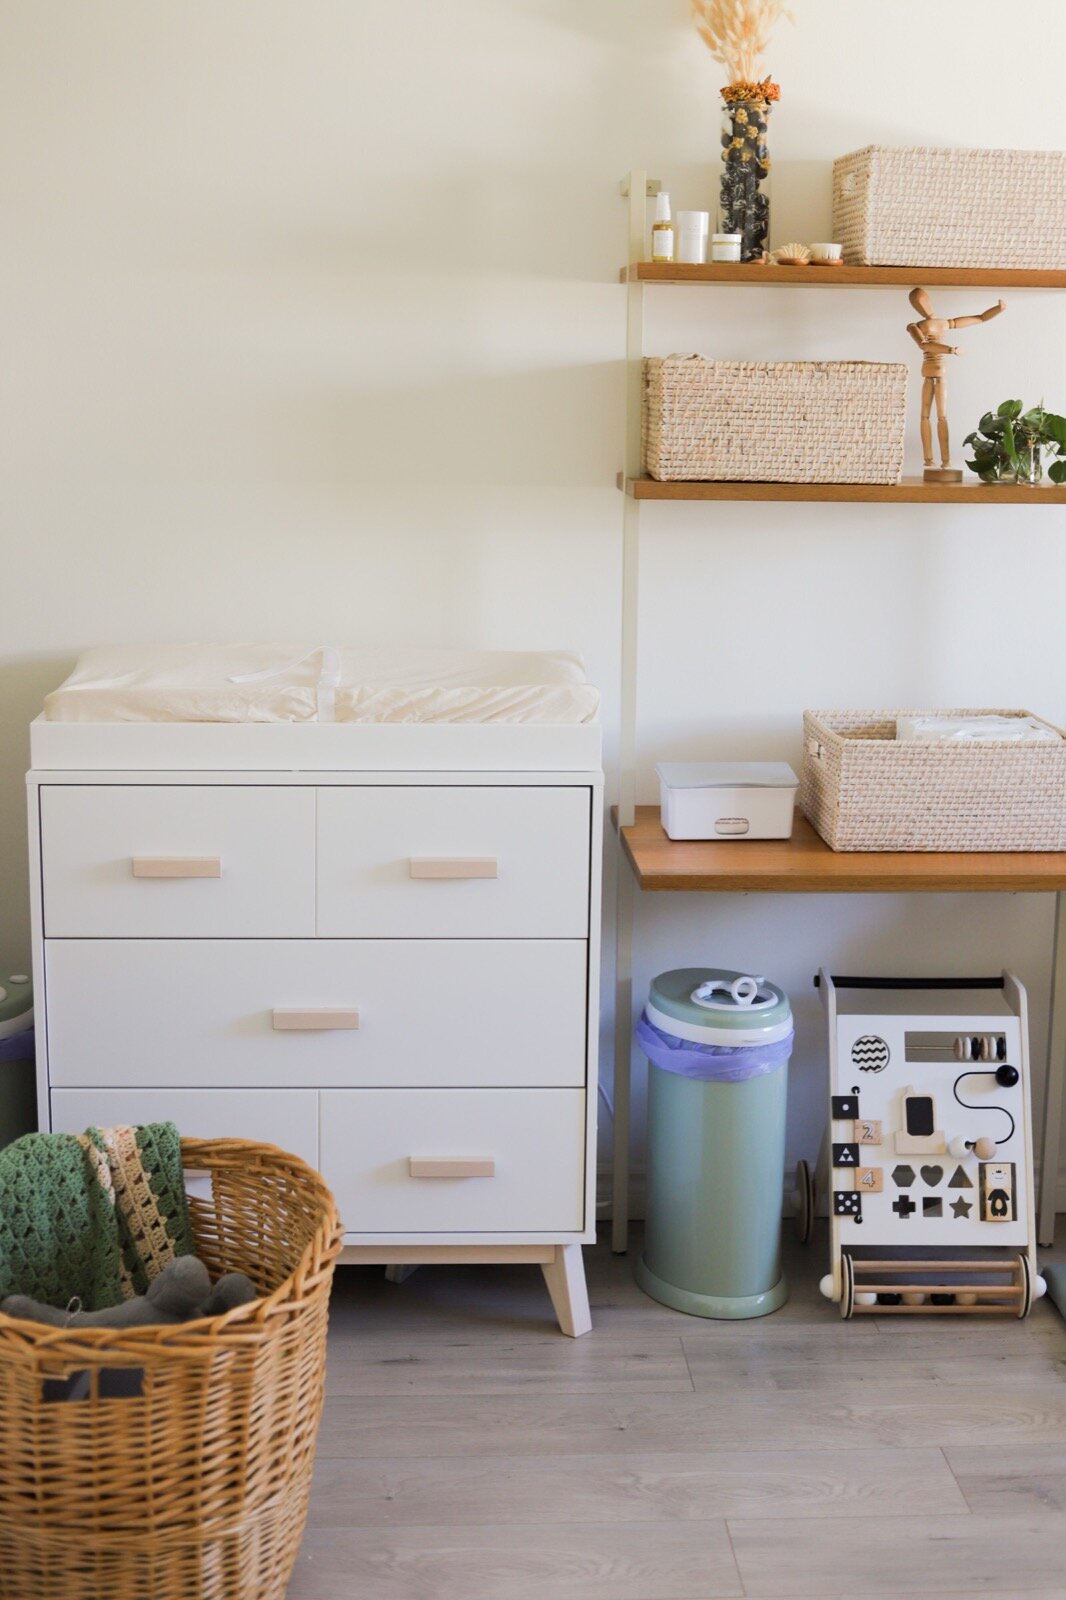 boy girl twin nursery reveal, green neutrals wood baby nursery reveal inspiration inspo, small la apartment nursery, di di twins, primally pure baby kit, cute storage baskets, babyletto changing table, ubbi diaper pail, wooden walker toy, colgate ch…